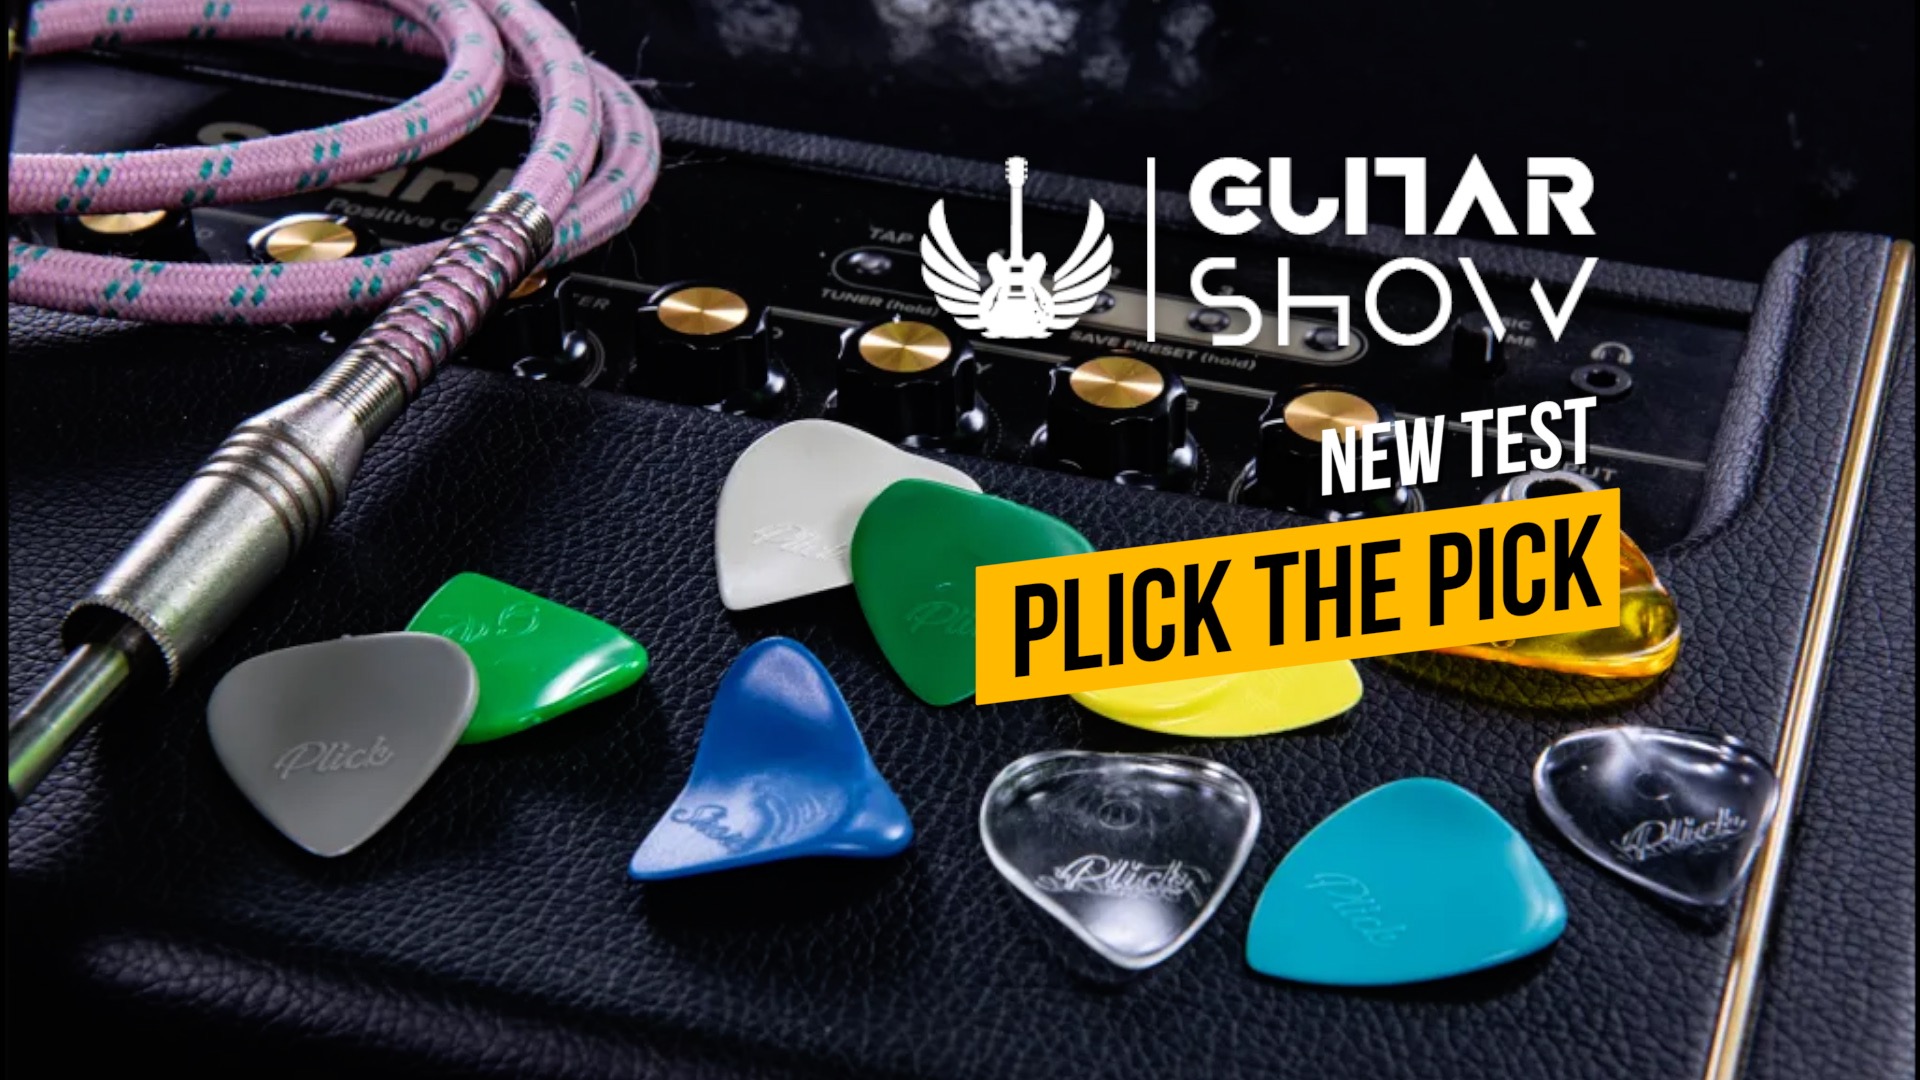 Plick the Pick: comfort and performance without compromise